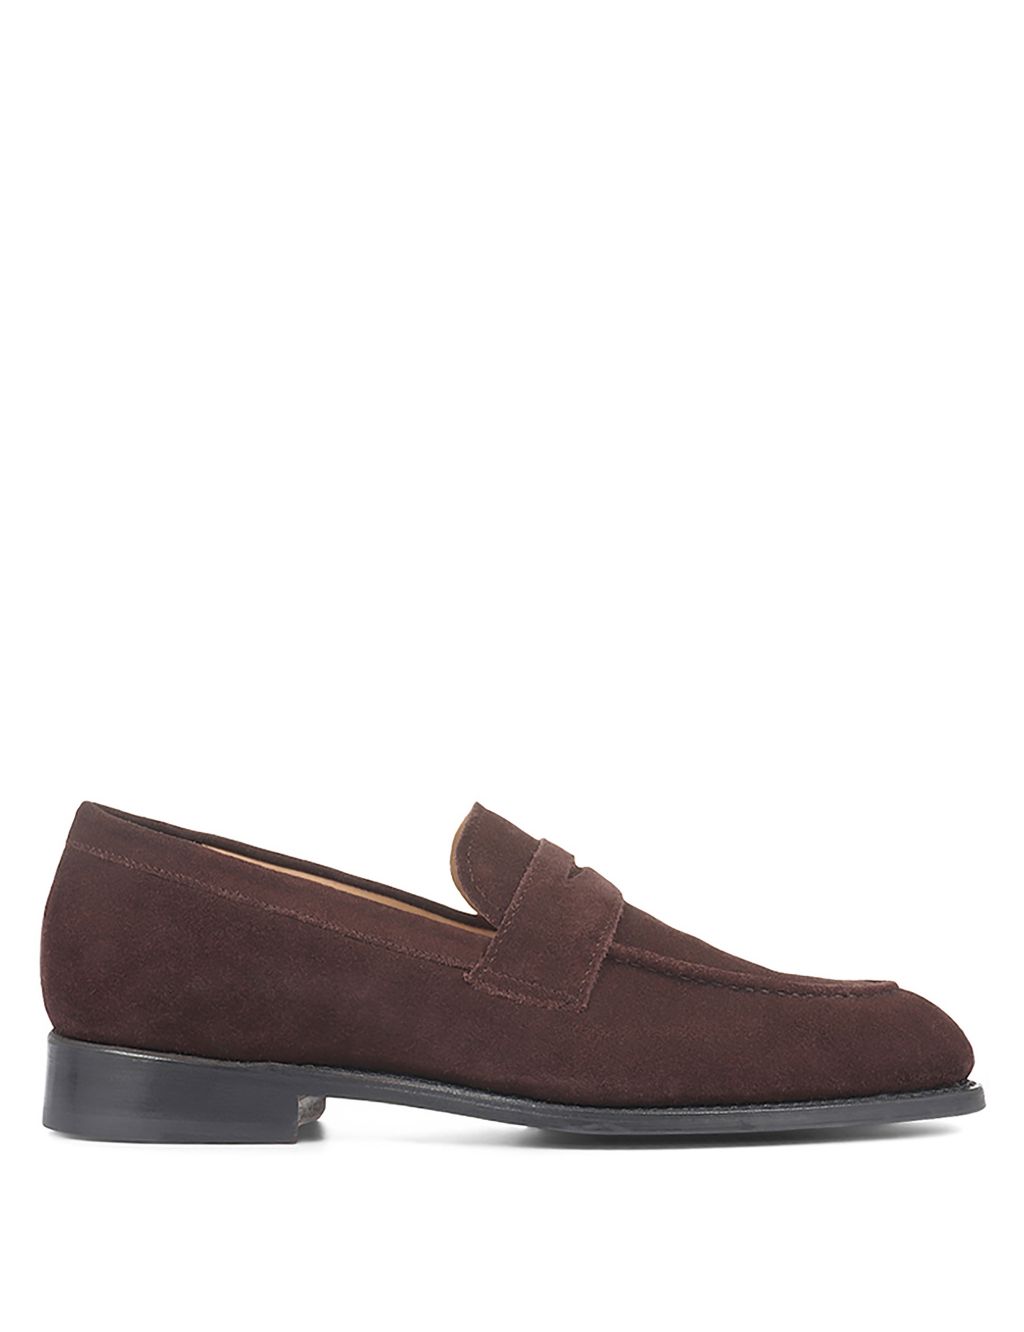 Leather Goodyear Welted Slip-On Loafers image 5